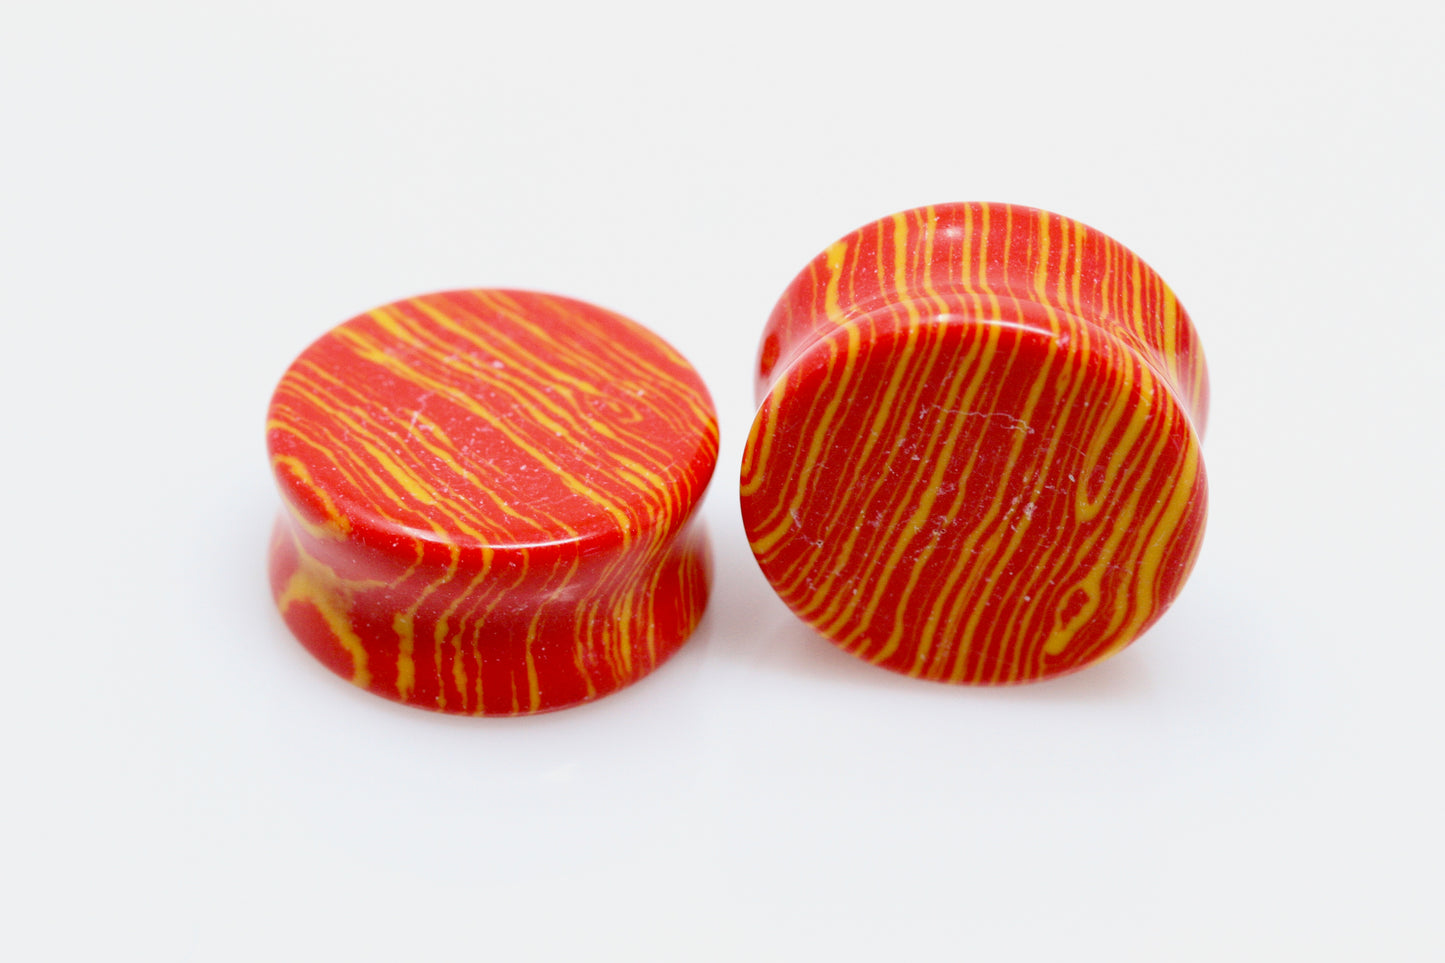 Solar Haze Plugs for Stretched Ears (Pair) - PH156